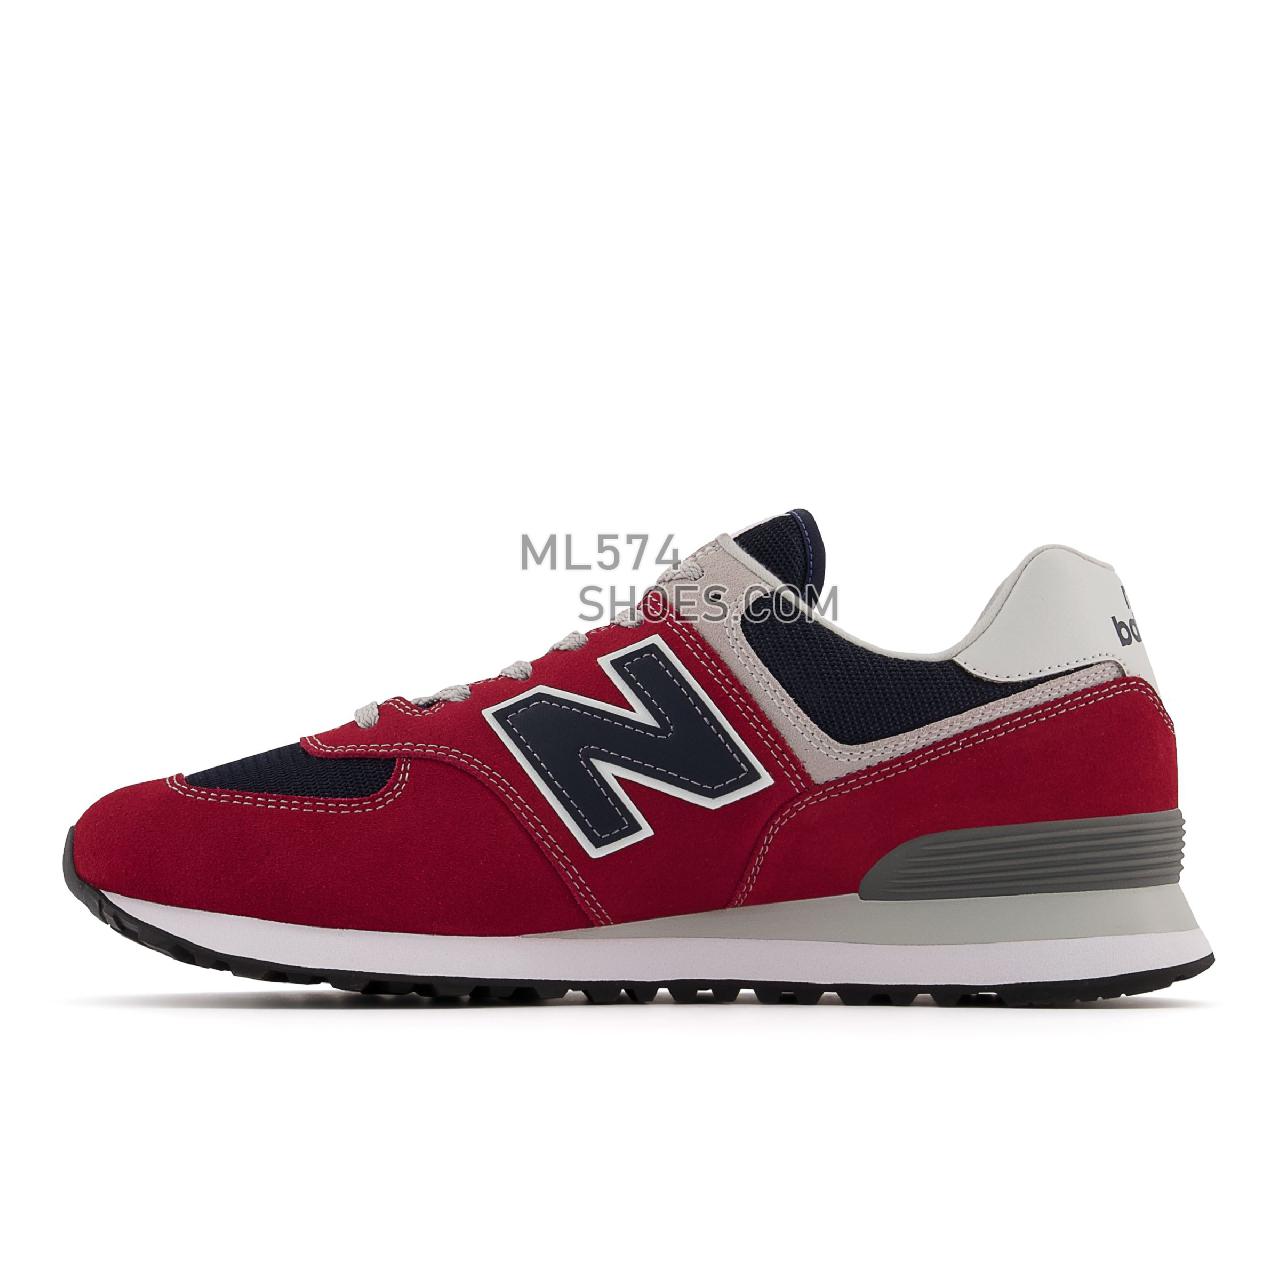 New Balance 574v2 - Men's Classic Sneakers - Red with Navy - ML574EH2